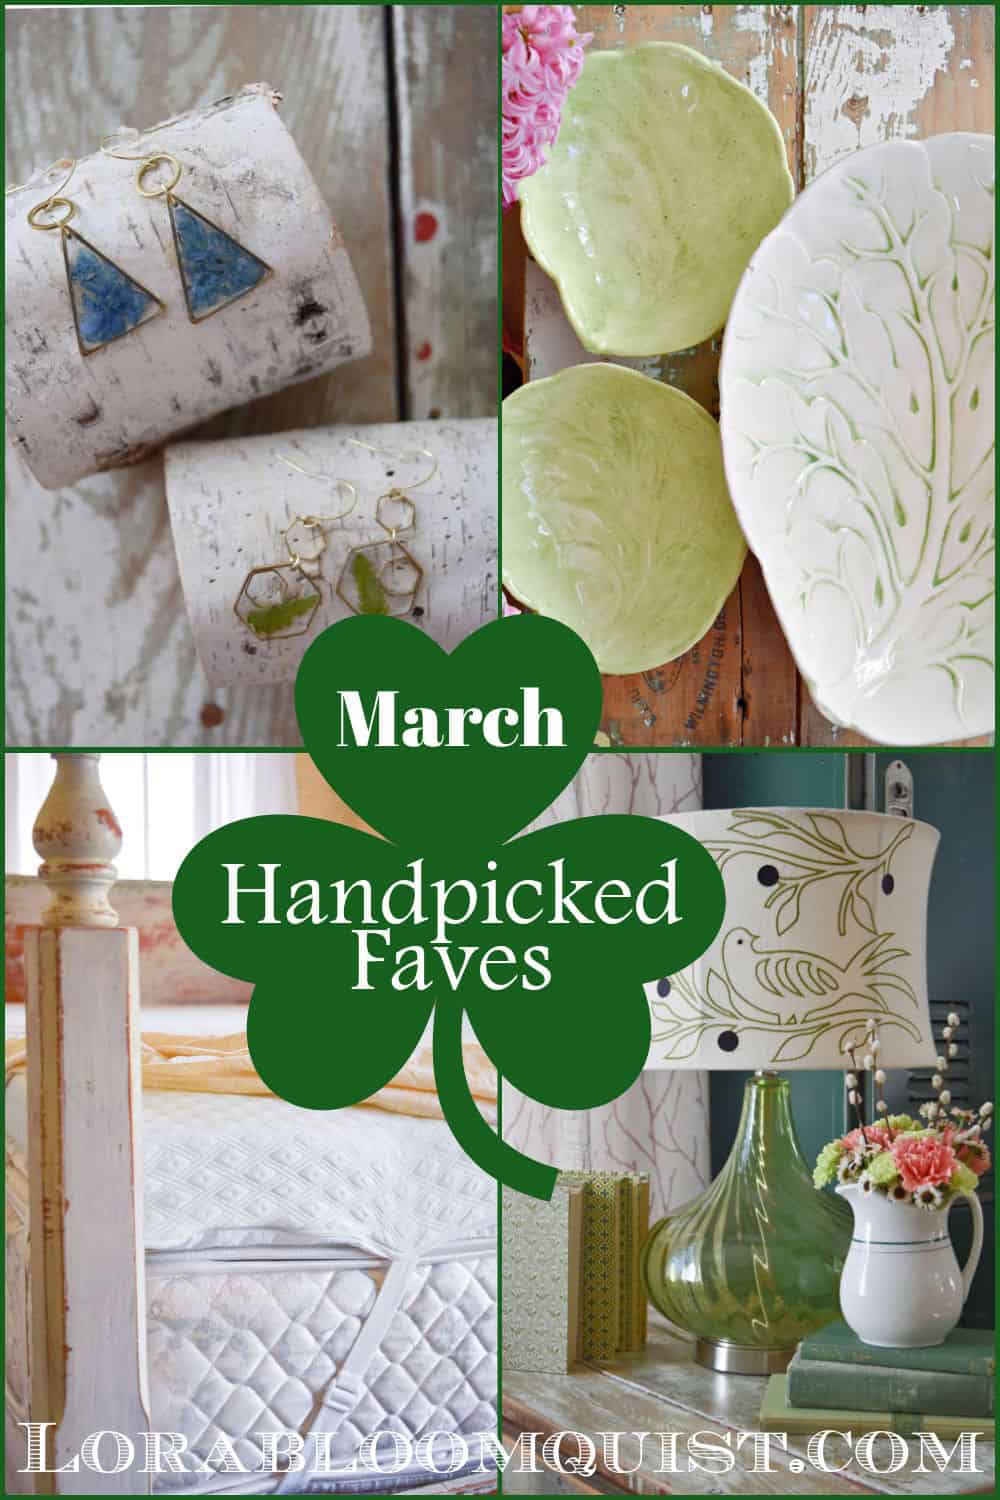 Resin earrings, lettuceware, and a green lamp are March favorite picks.